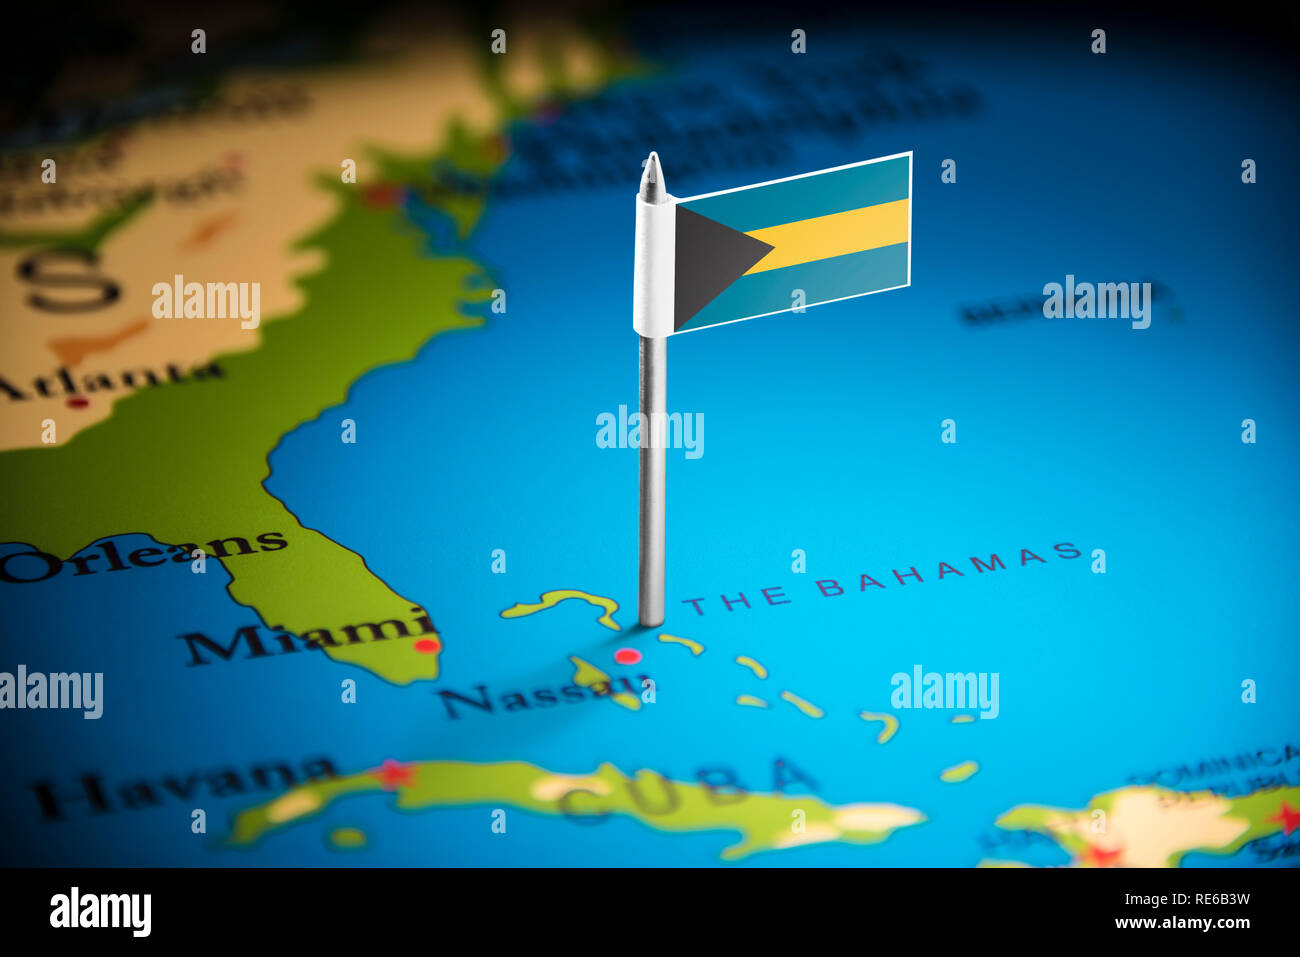 Bahamas marked with a flag on the map Stock Photo